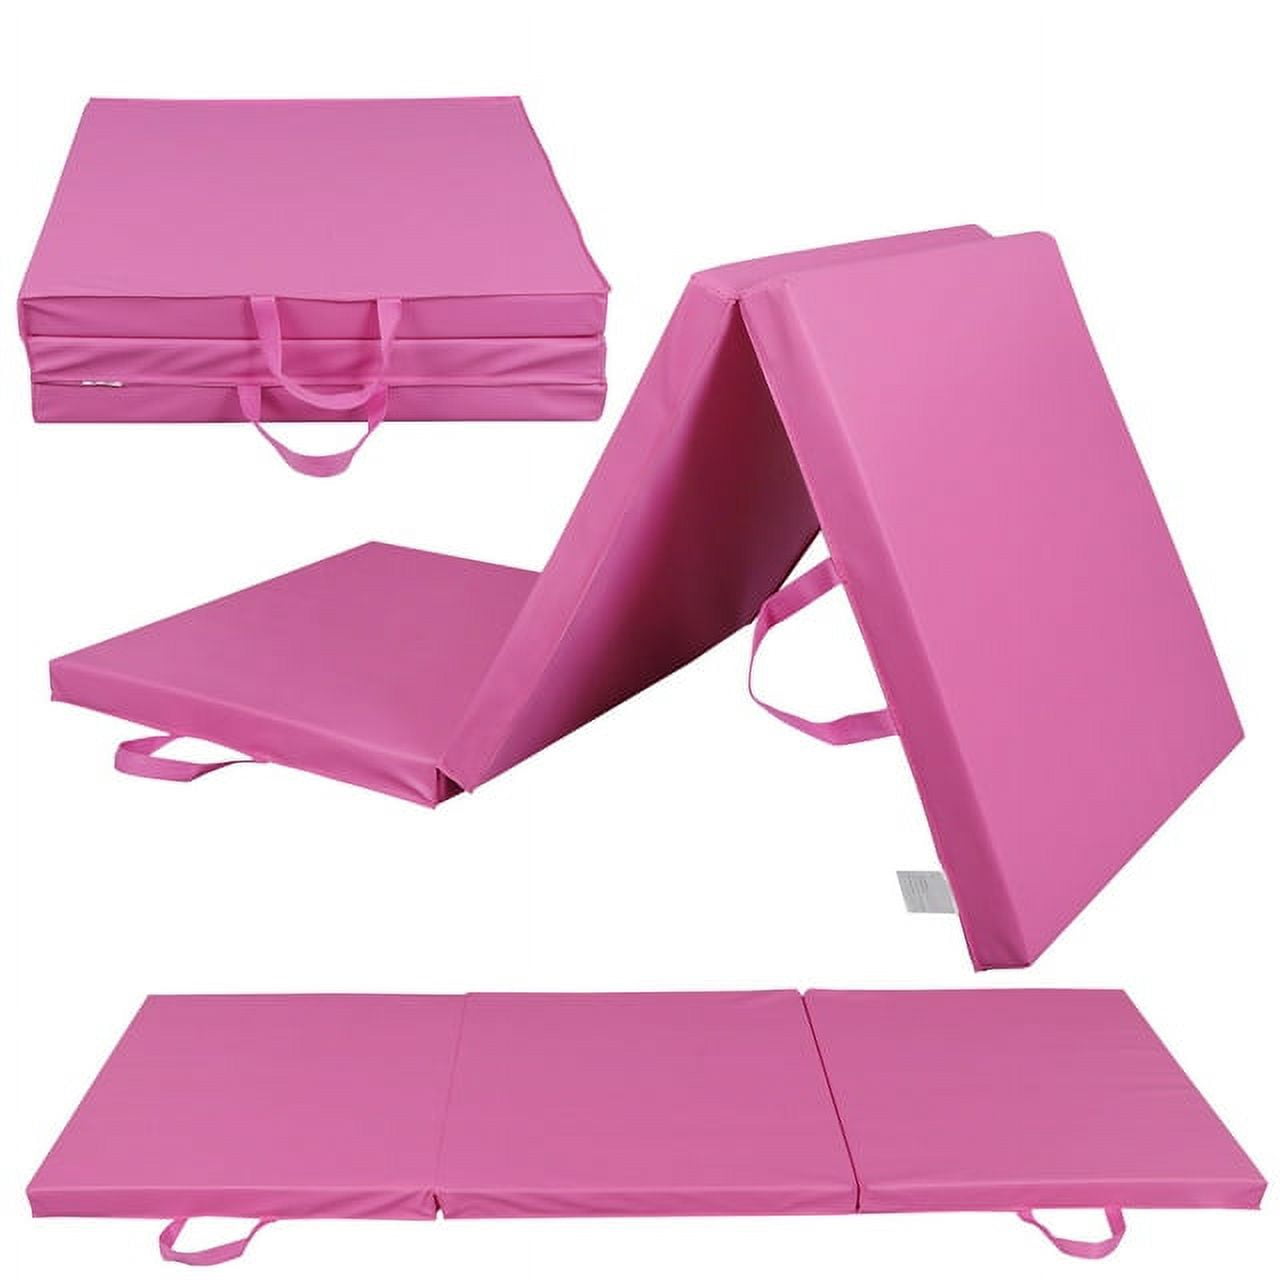 ZENY 6 Ft. x 2 Ft. x 2 In. Tri-Fold Gymnastic Folding Exercise